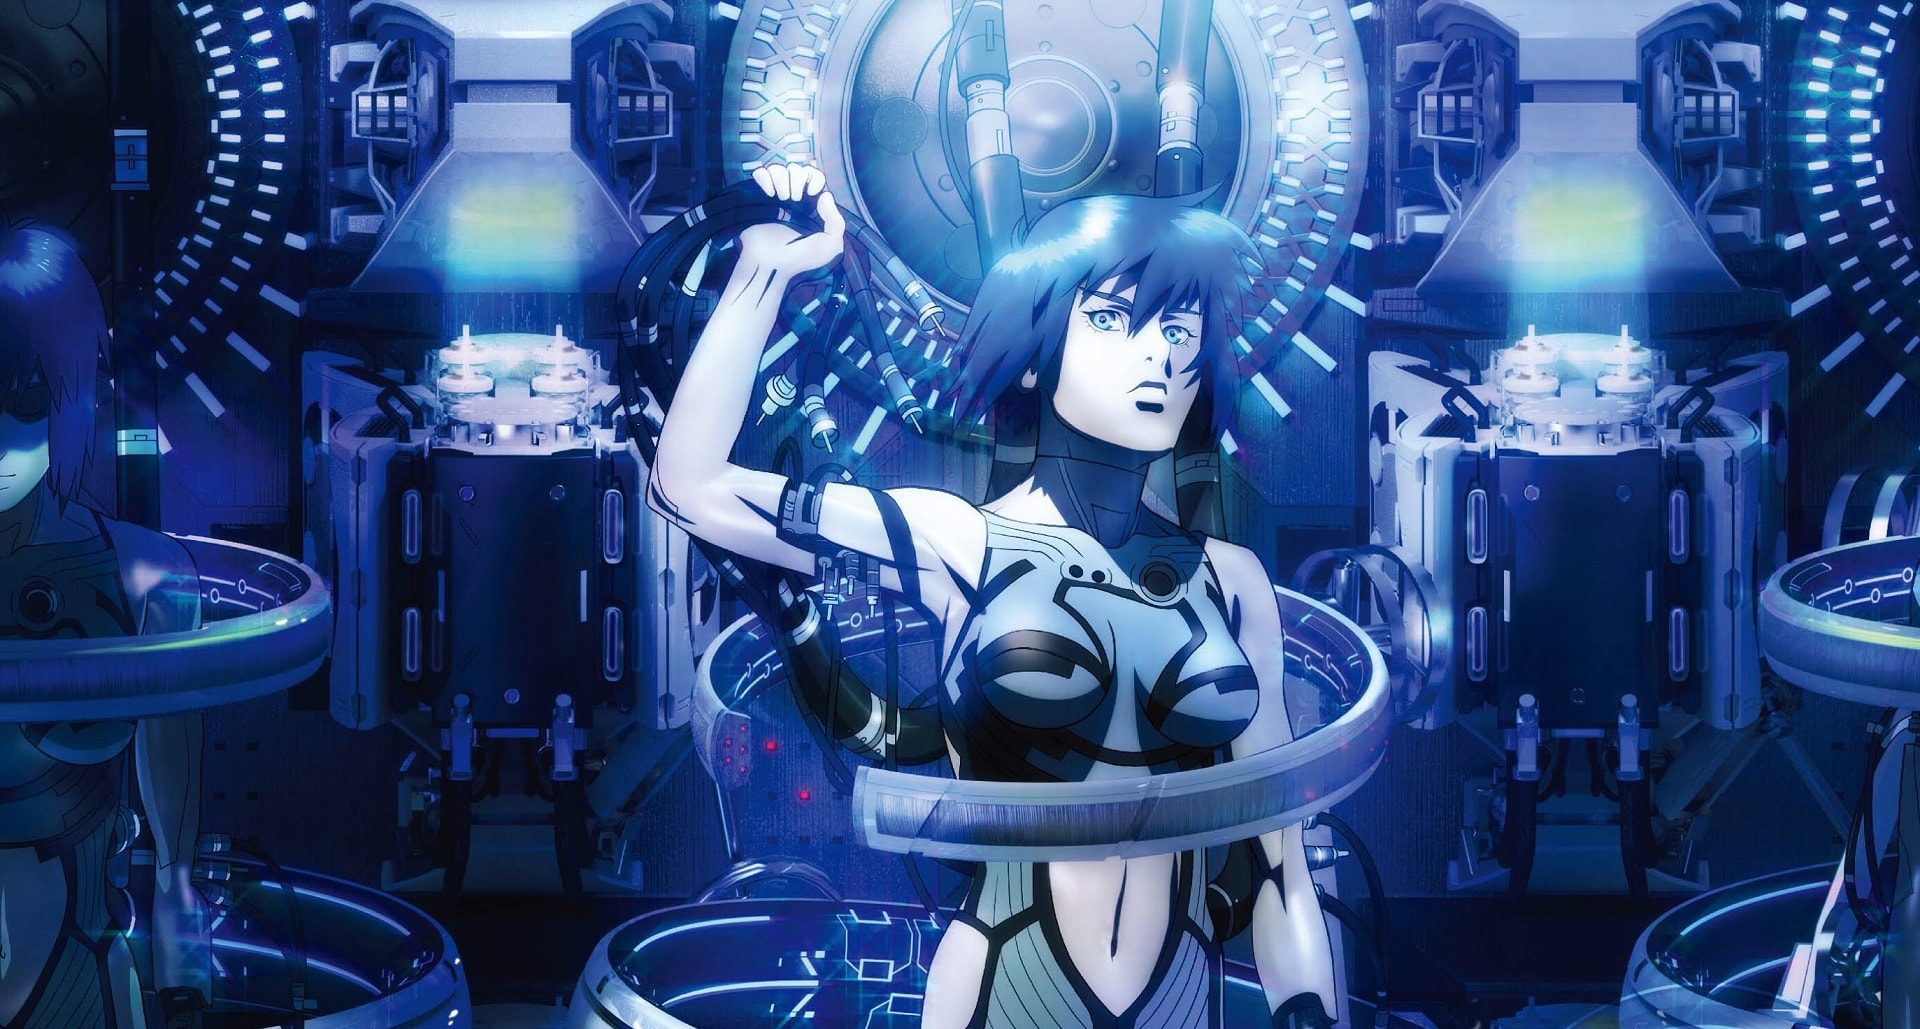 download ghost in the shell 1995